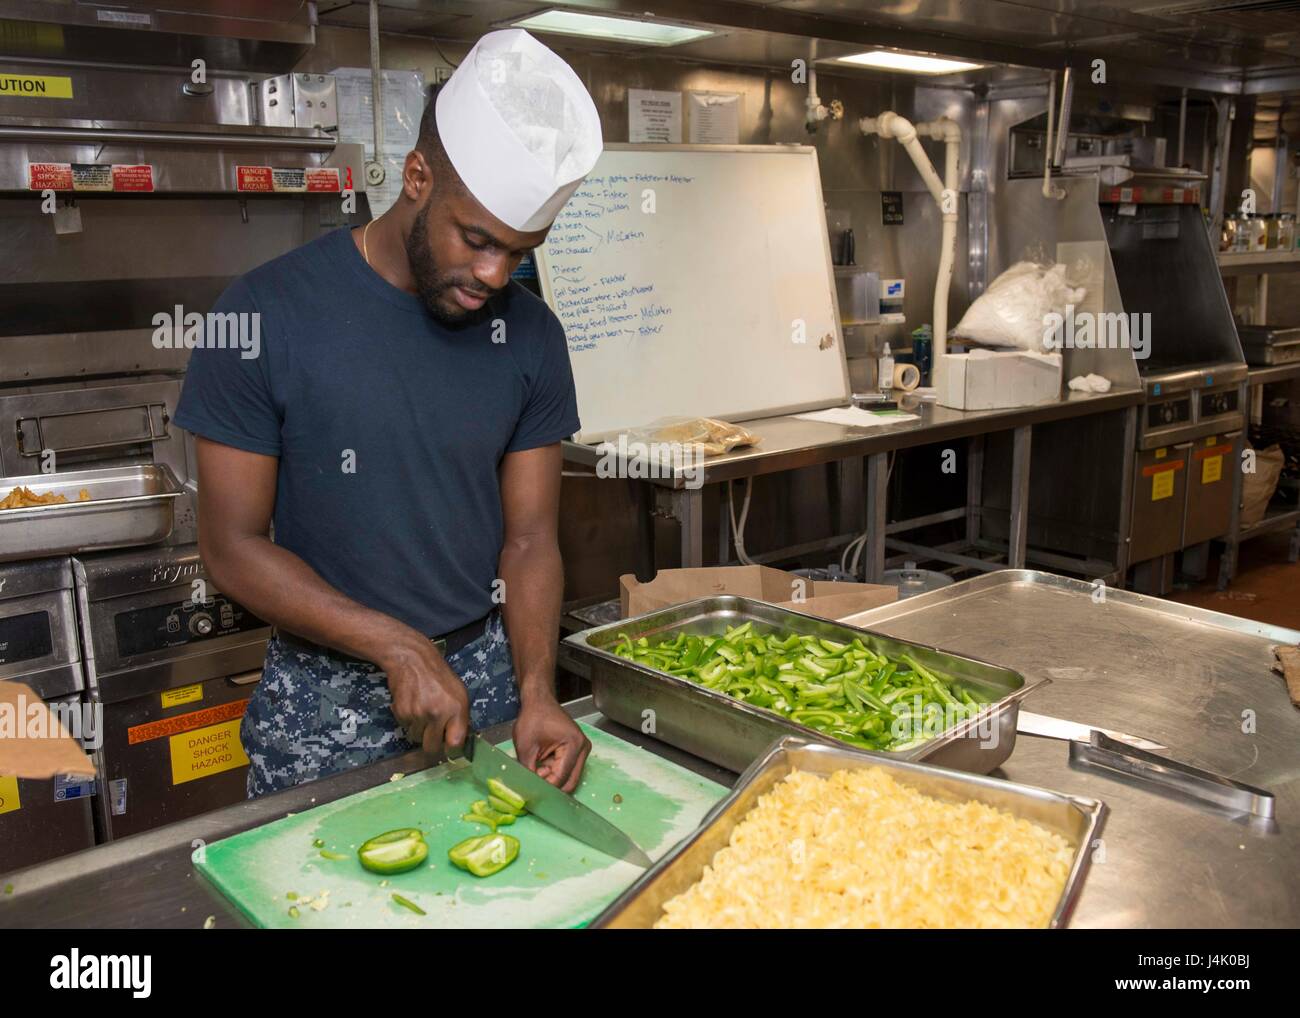 SAN DIEGO (Sept. 30, 2016) Seaman Stephan Neemar chops vegetables in preparation for lunch in the ship’s main galley onboard amphibious assault ship USS Boxer (LHD 4). Boxer returned to its homeport, San Diego, September 12, following a seven-month deployment to the 3rd, 5th, and 7th Fleet areas of operation. (U.S. Navy photo by Petty Officer 3rd Class Jesse Monford/Released) Stock Photo